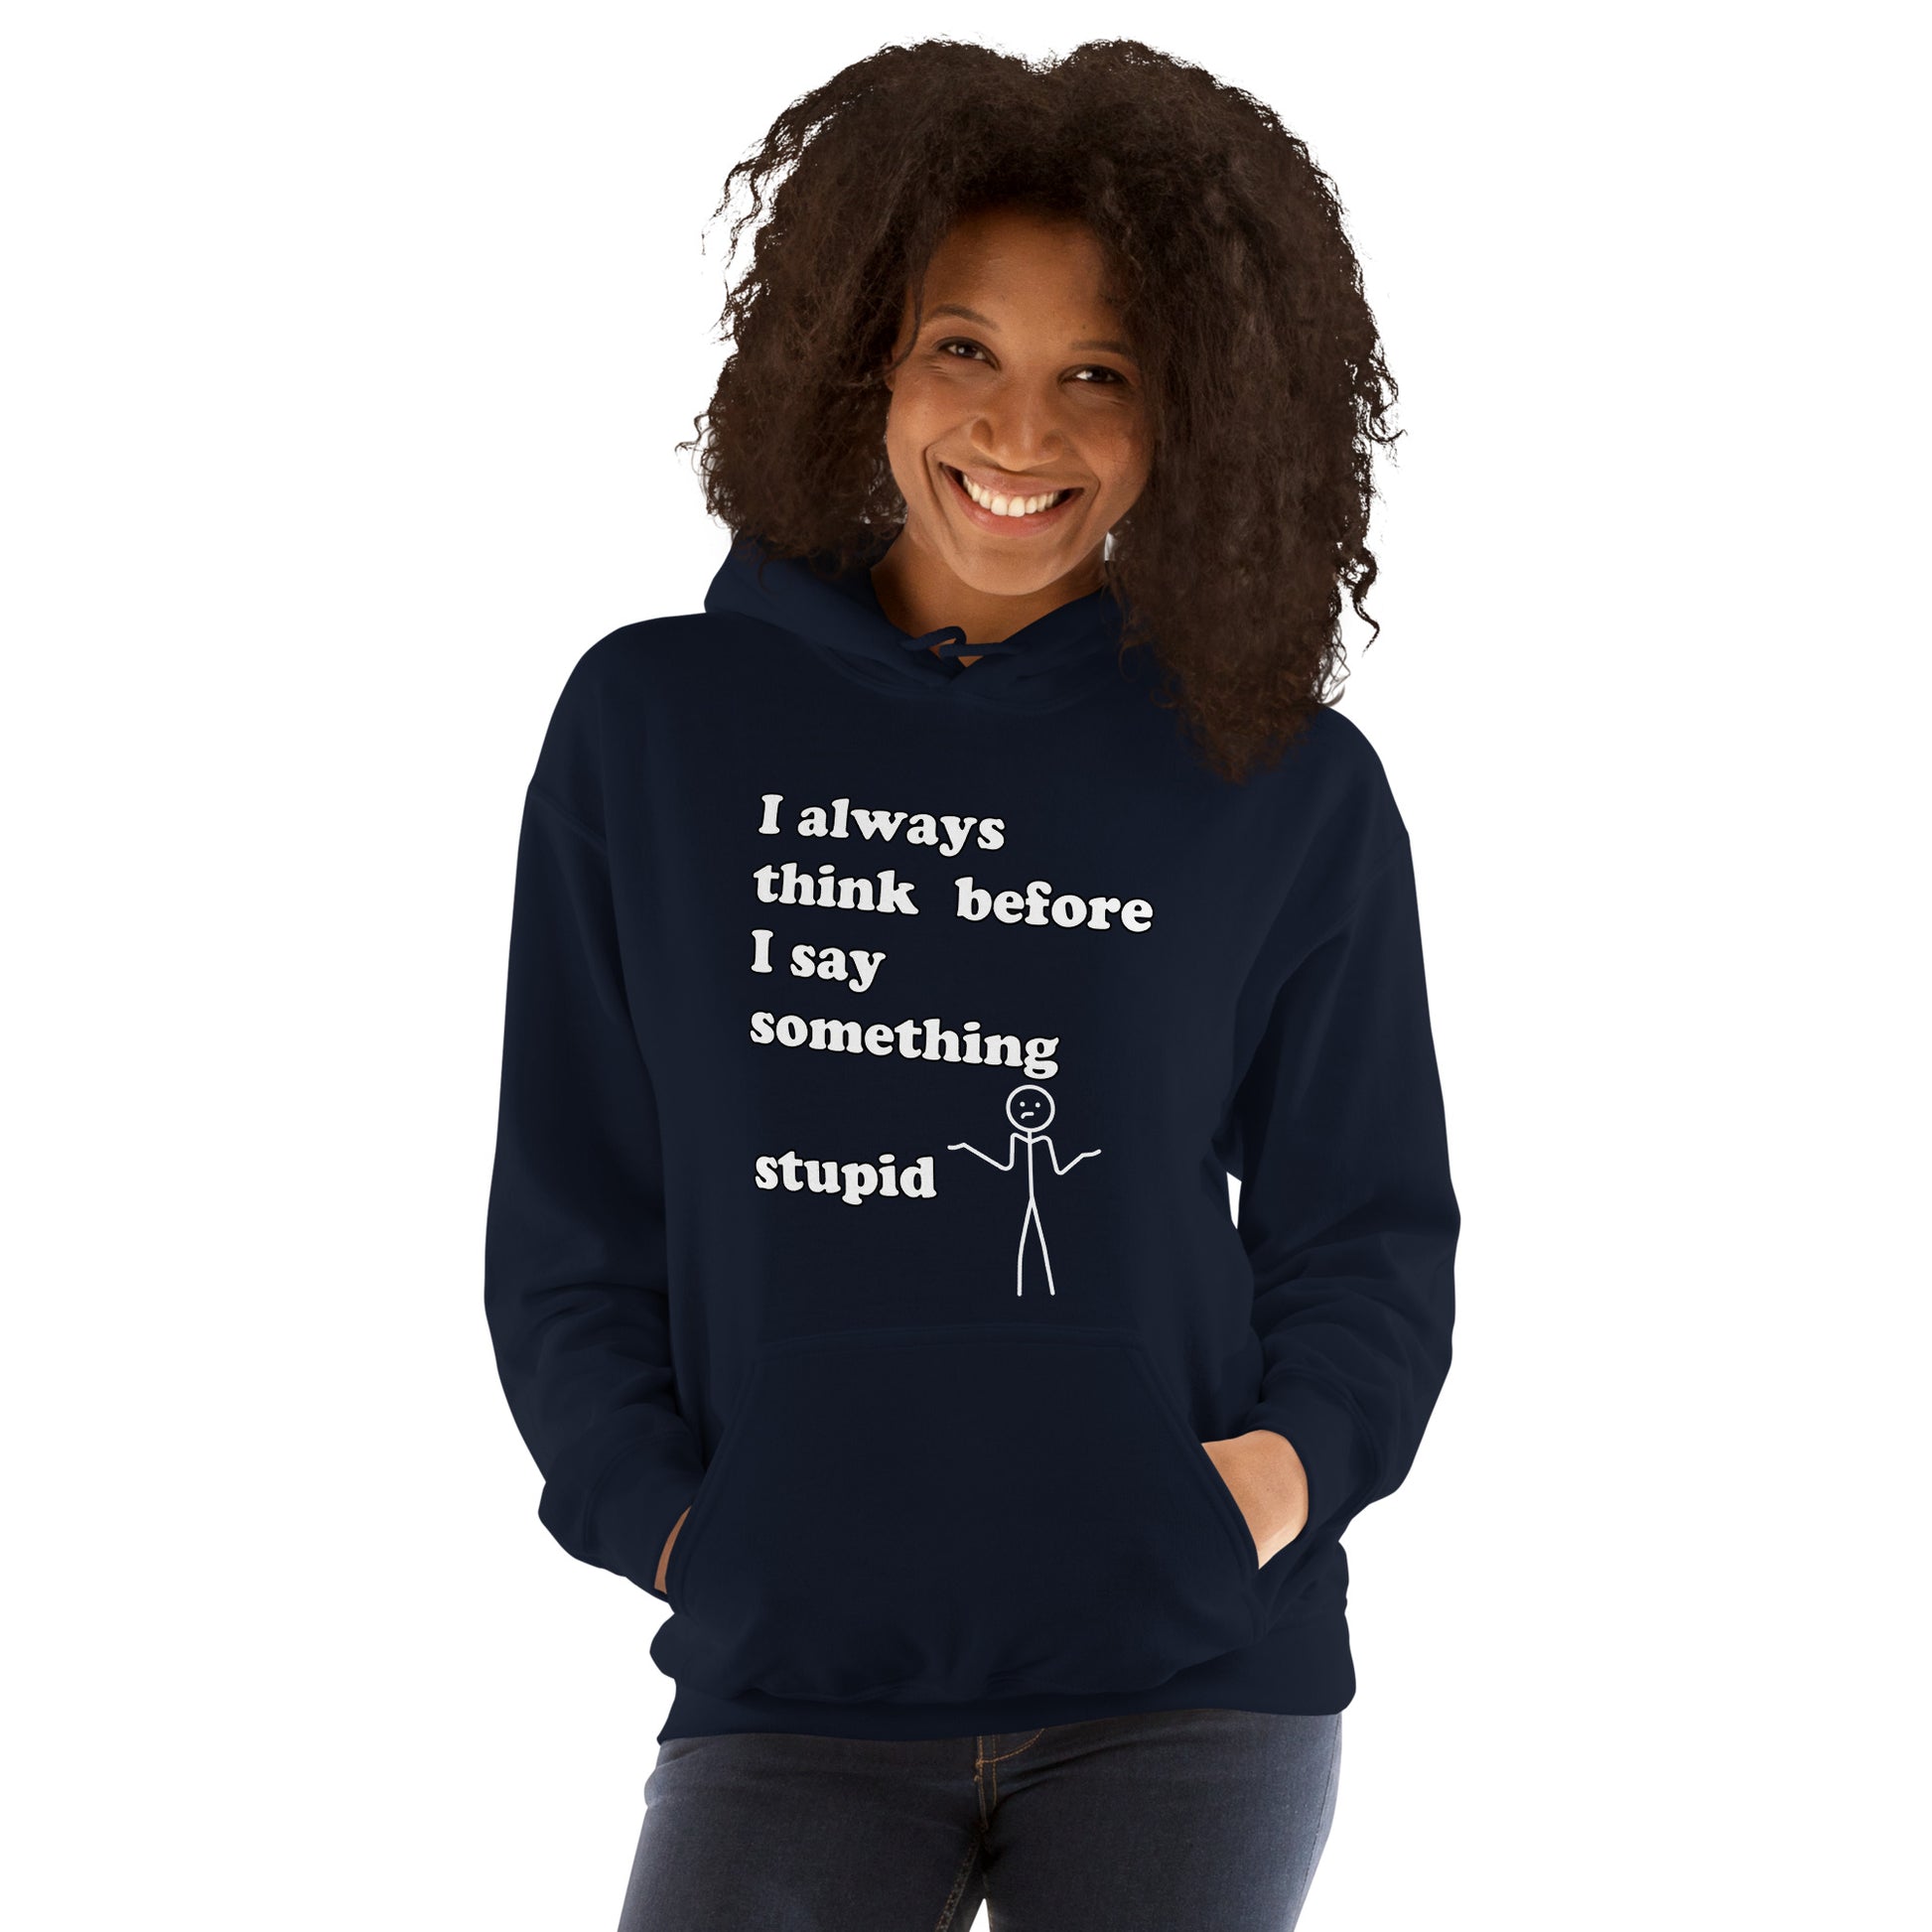 Woman with navy blue hoodie with text "I always think before I say something stupid"